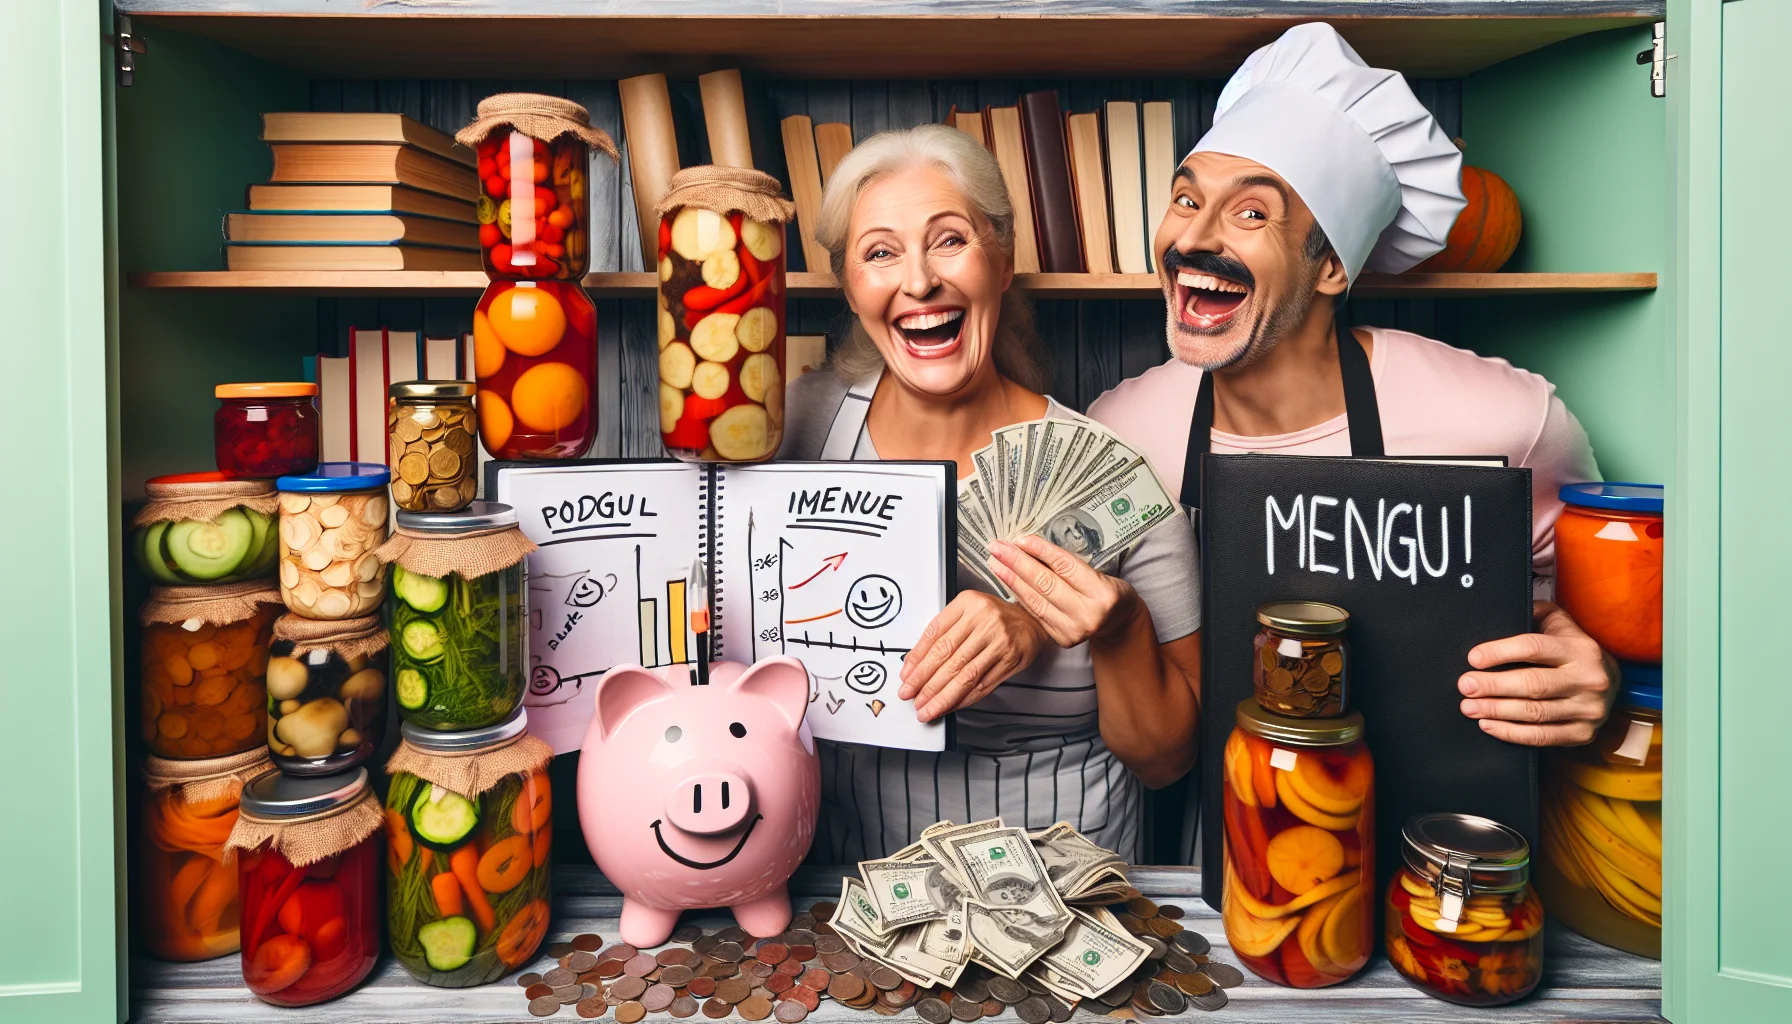 An amusing scene capturing Food Preservation and Menu Planning. We see a variety of vividly colorful preserved fruits and vegetables, stacked neatly inside a well-organized pantry. A set of cookbooks are situated near a personalized menu plan full of budget-friendly meals, with marker scribbles and smiley faces on it. A man with a chef's hat (Caucasian) is grinning broadly, holding out fresh produce in one hand and shaking a piggy bank with the other, coins jingling from within. A middle-aged woman (Black) is laughing, showing a wallet full of cash, saved from their low-cost meals. Their facial expressions convey they are genuinely enjoying their health-conscious and budget-smart lifestyle.